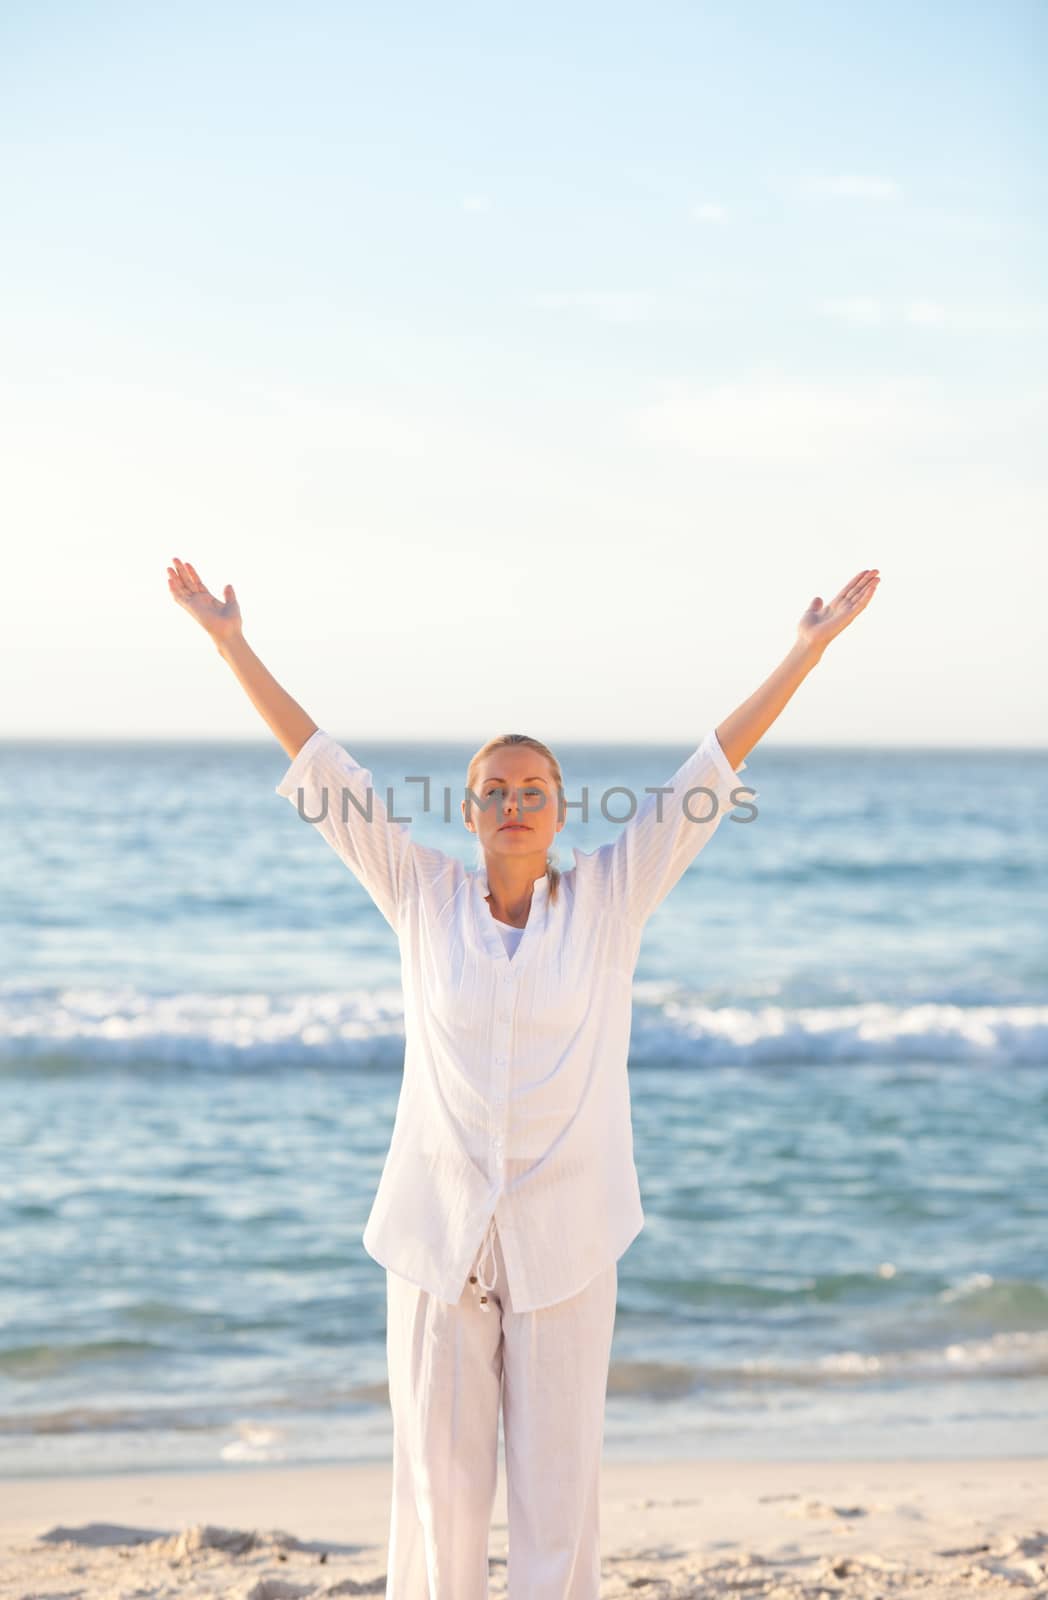 Woman practicing yoga at the beach against the sea